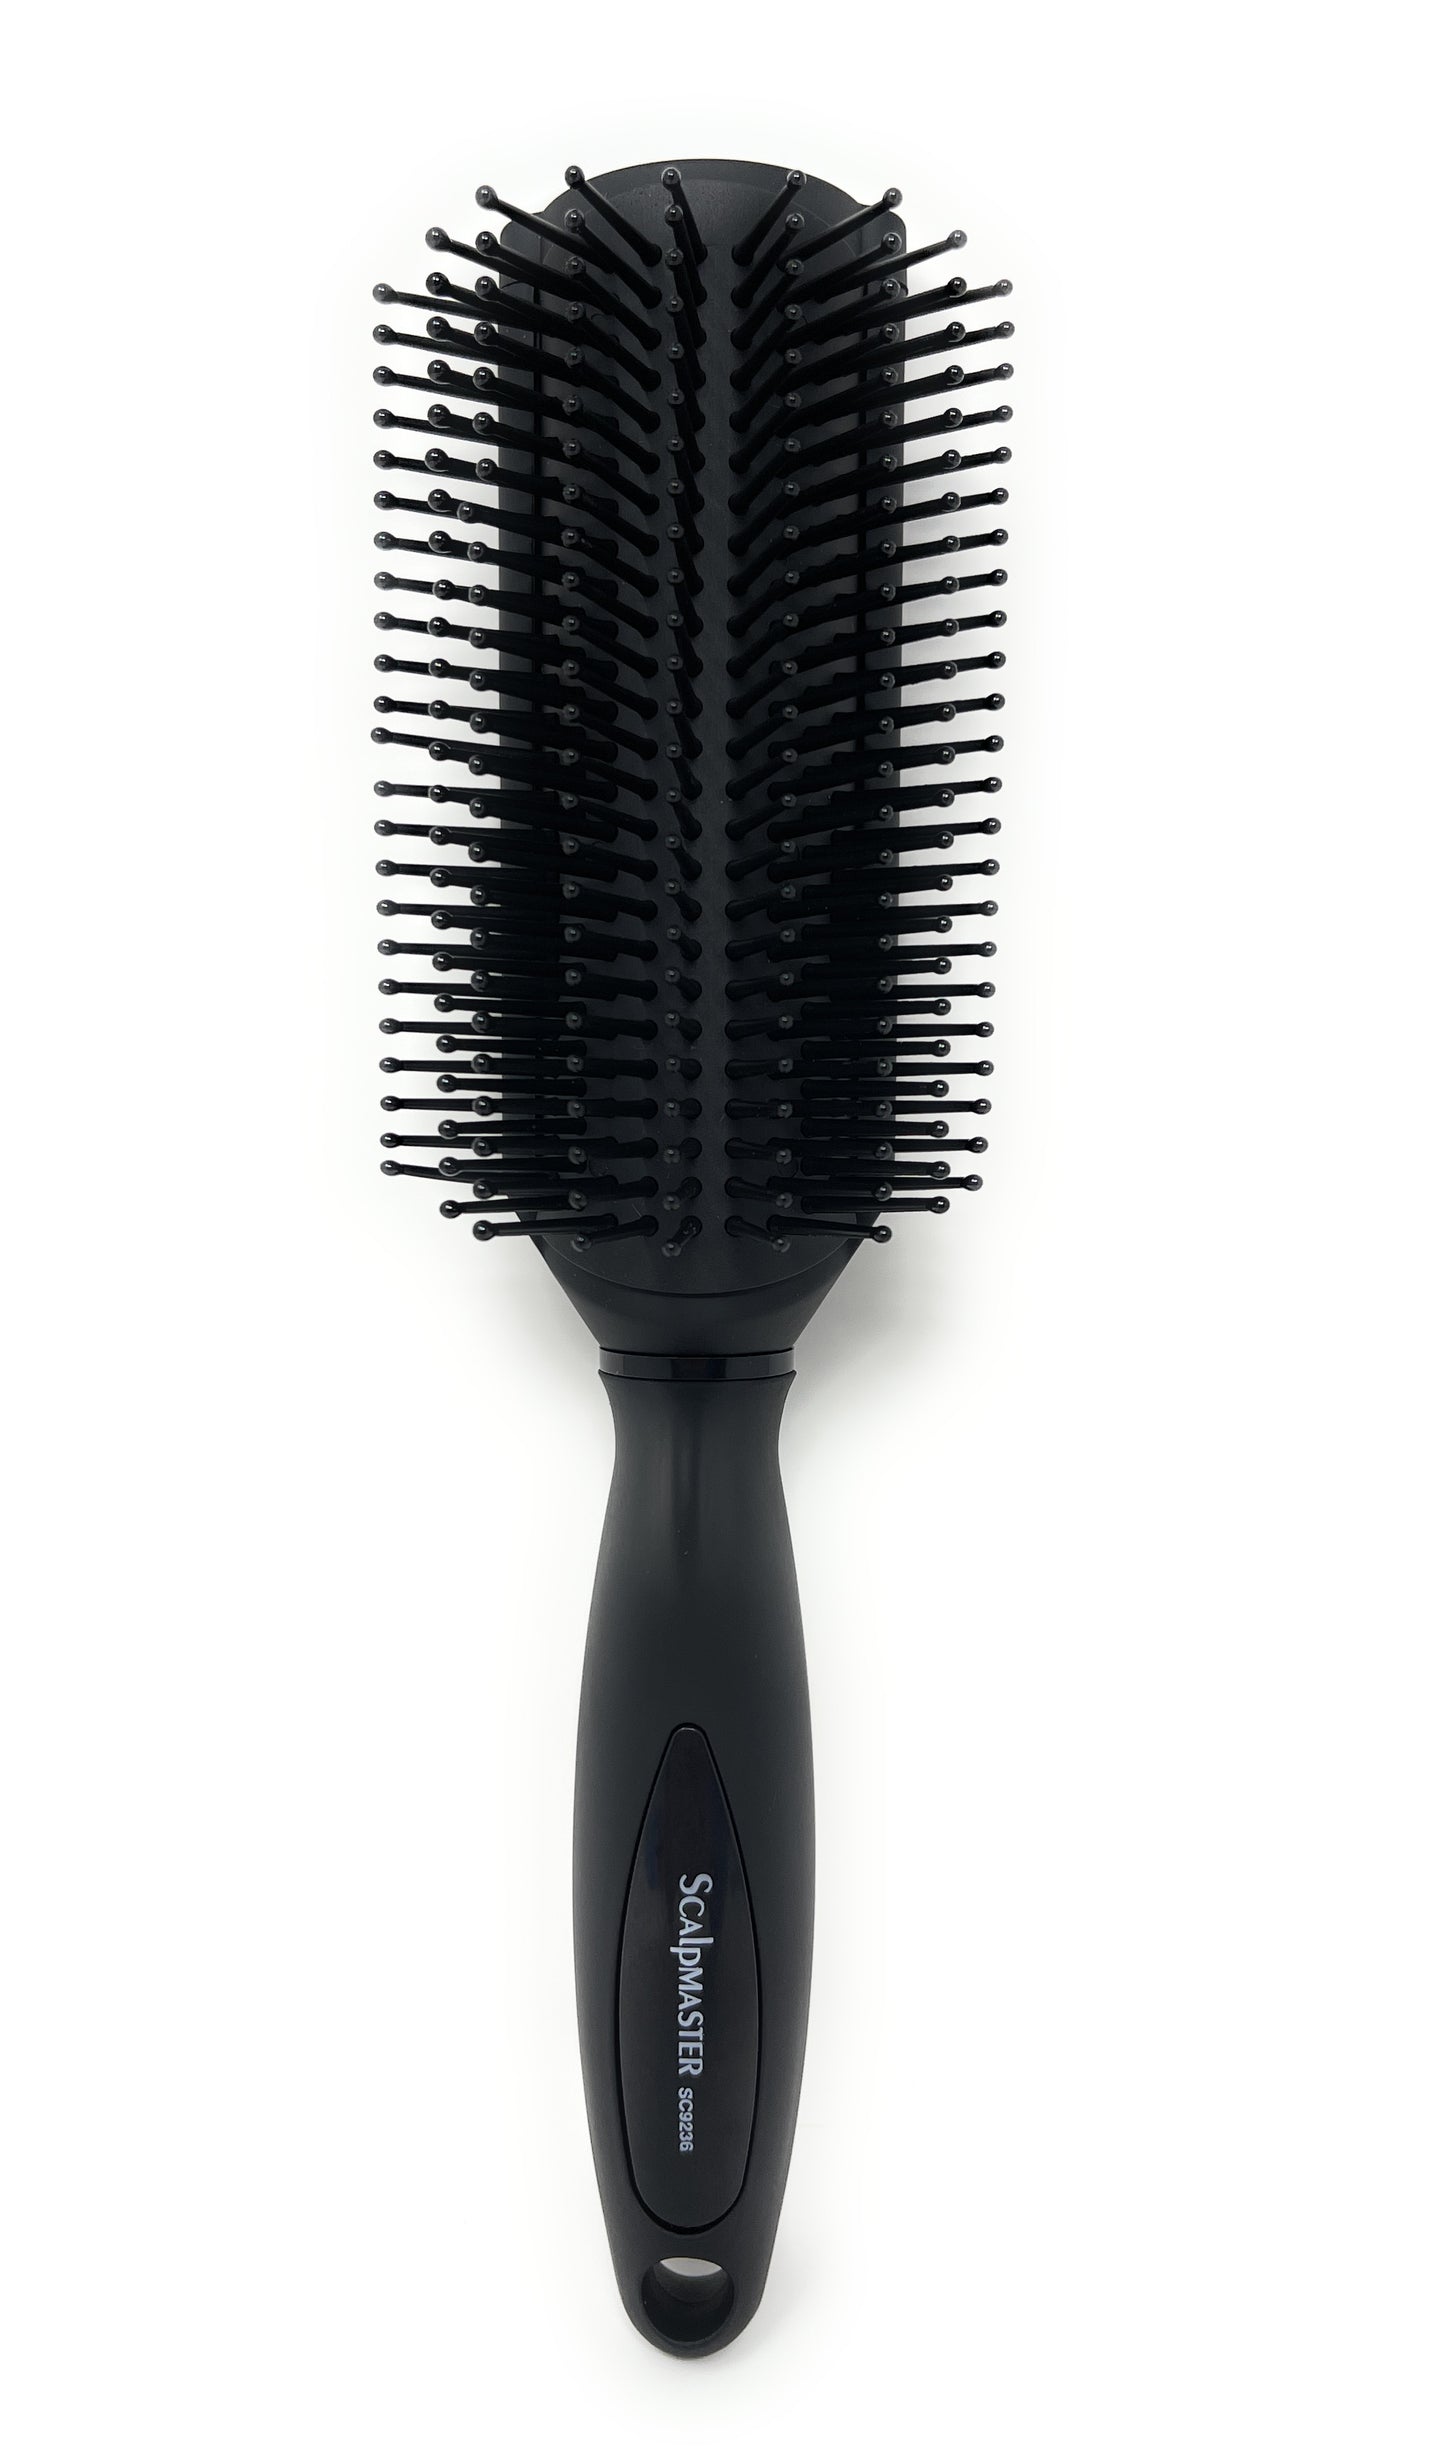 Scalpmaster Rubberized Base Hair Brush Styling For Curly Wavy Hair Black 1 Pc.